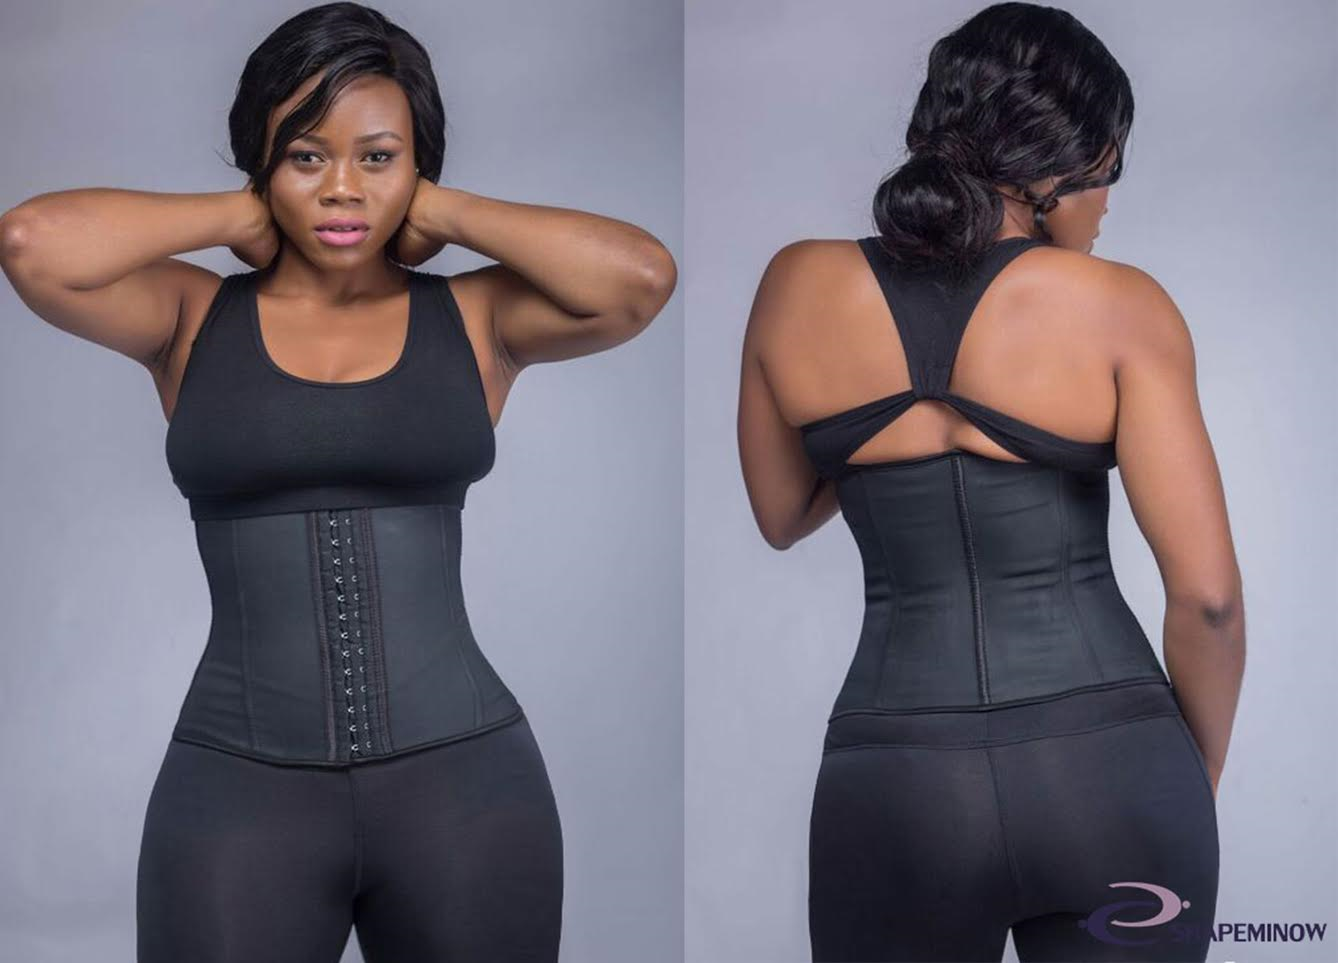 Stay pretty all round with ShapeMiNow high quality waist trainers.